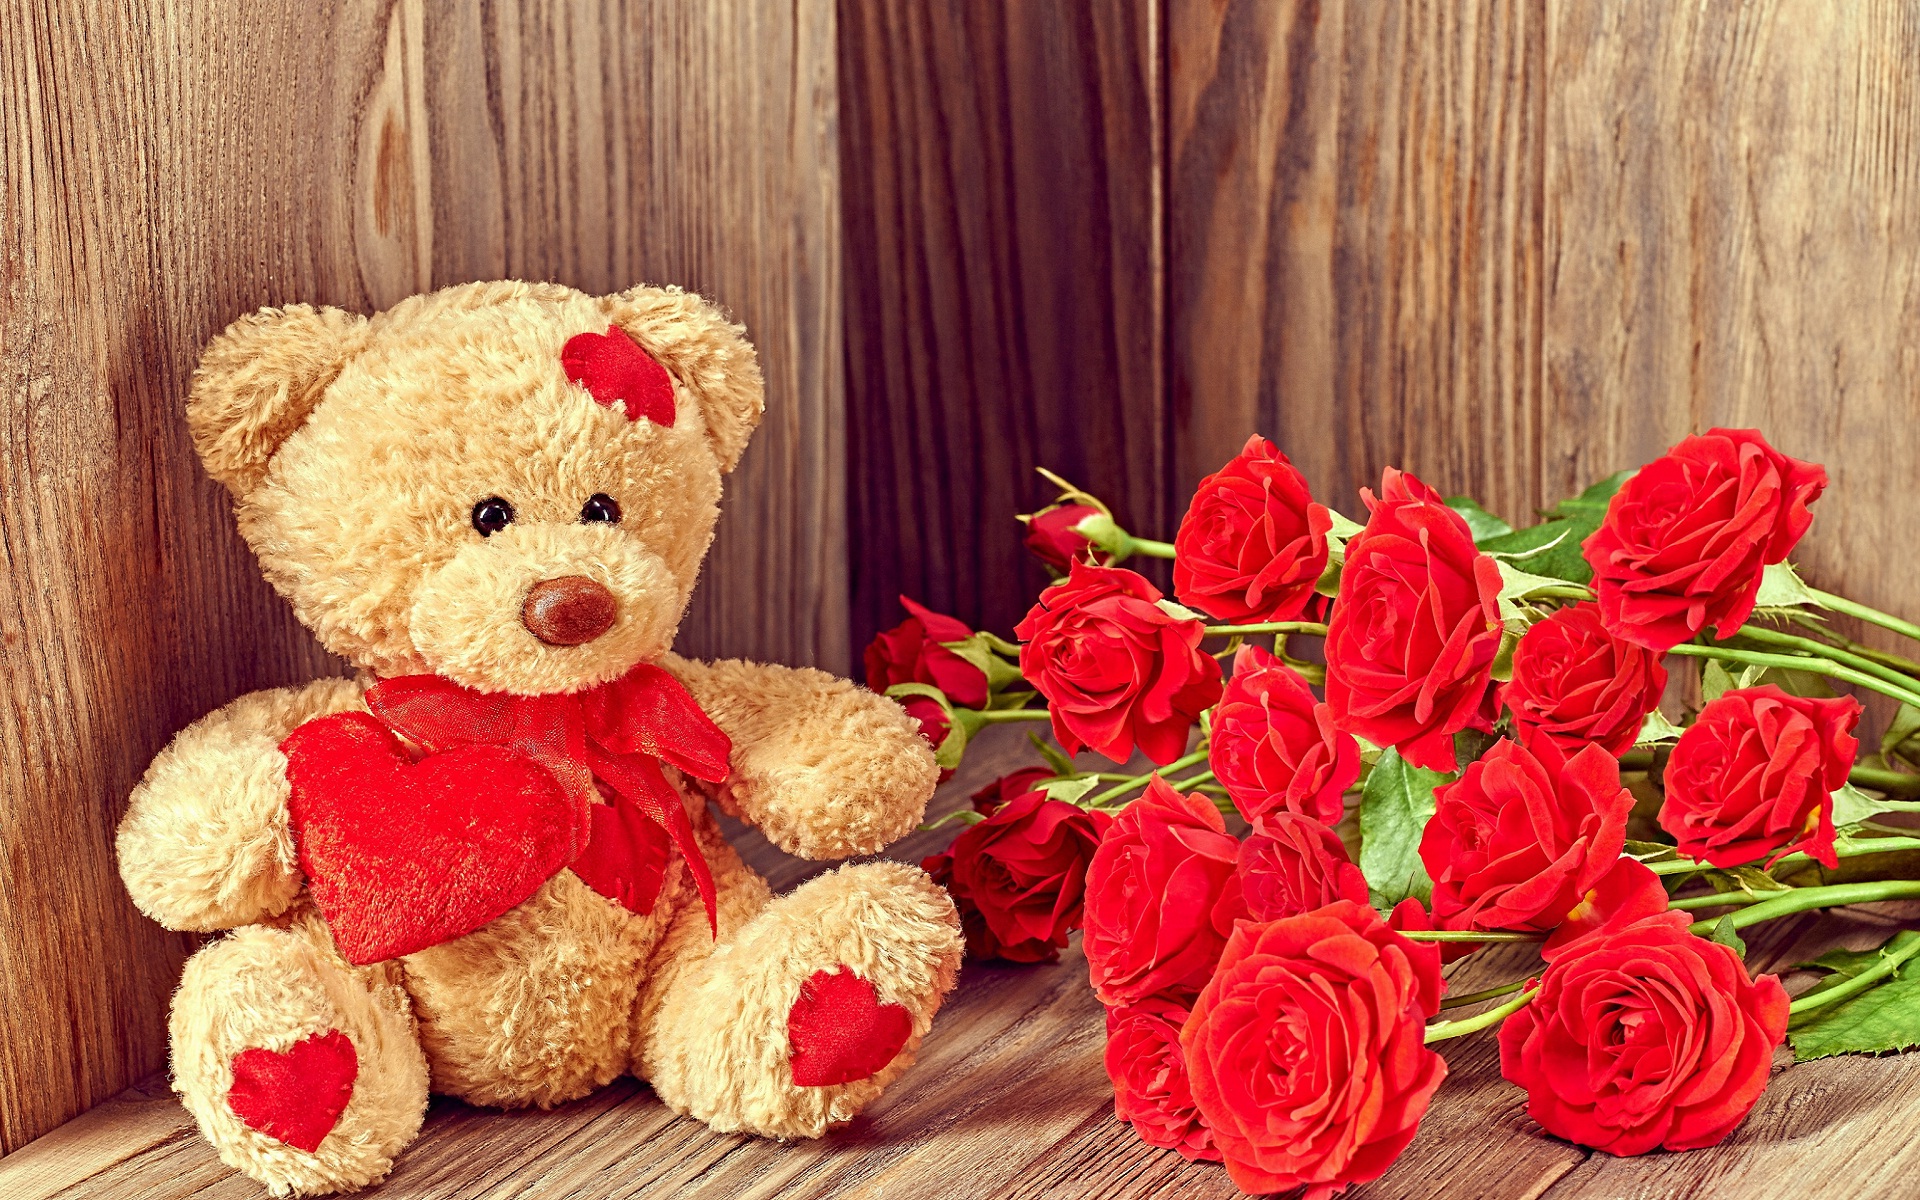 I-love-you-red-rose-flowers-and-teddy-Full HD 1920x1080 Wallpapers